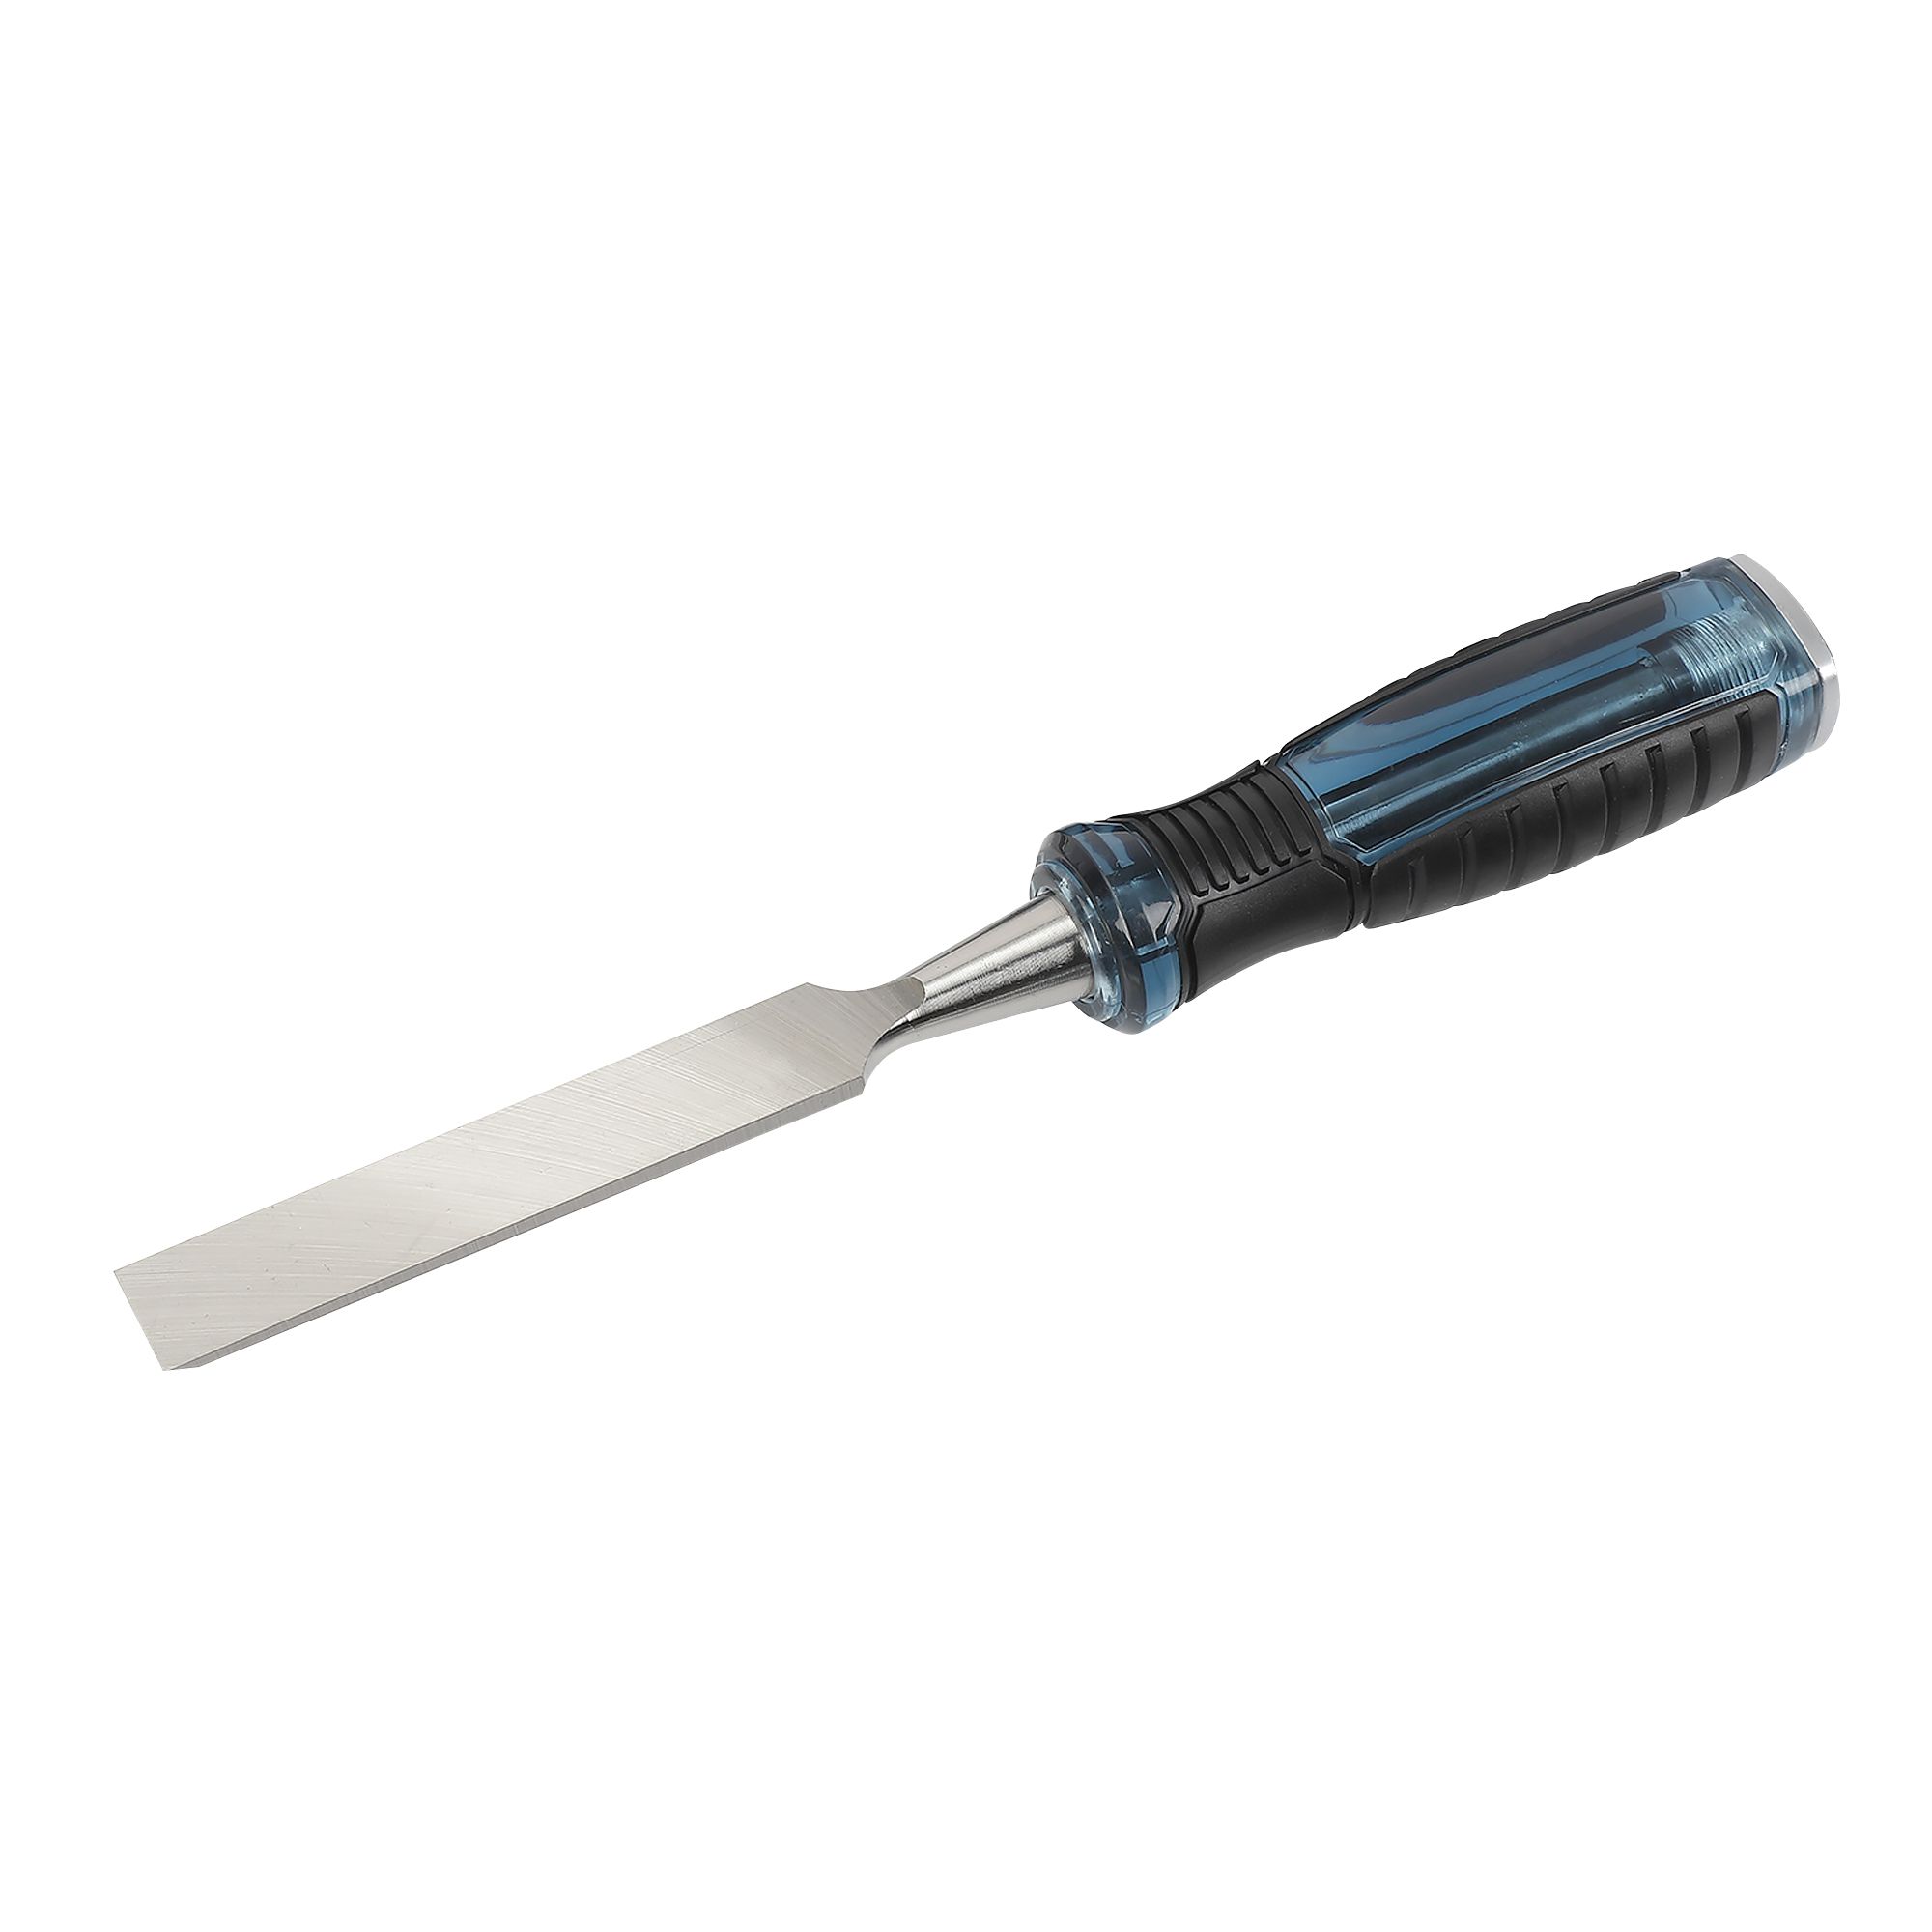 Erbauer 18mm Wood chisel